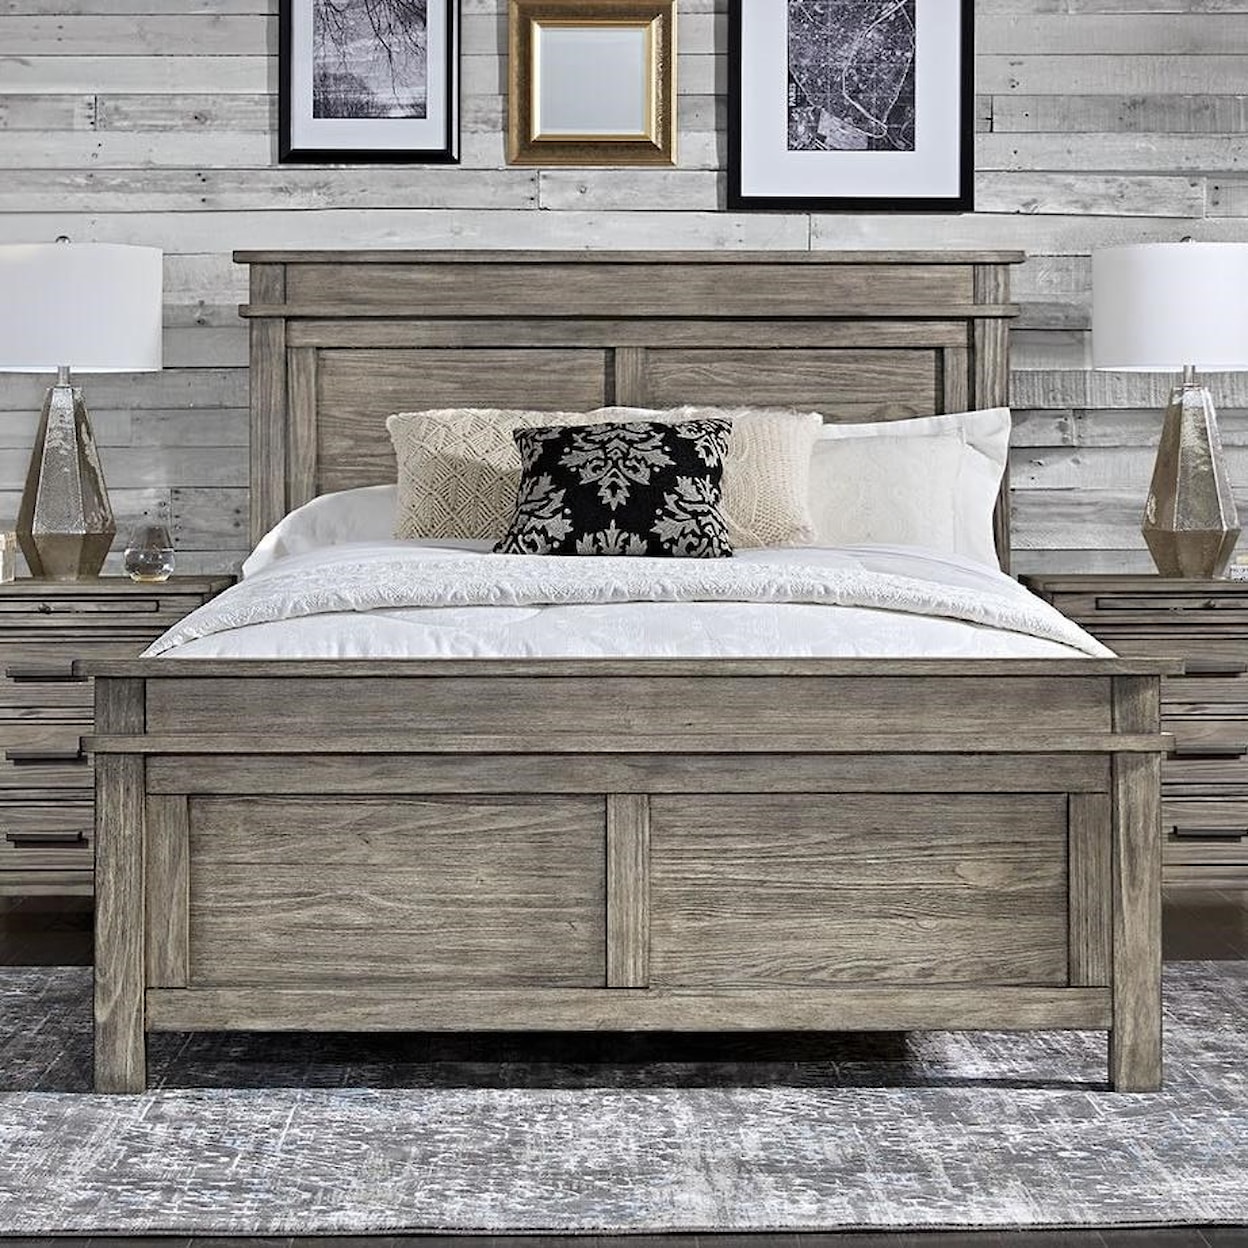 AAmerica Glacier Point California King Panel Bed